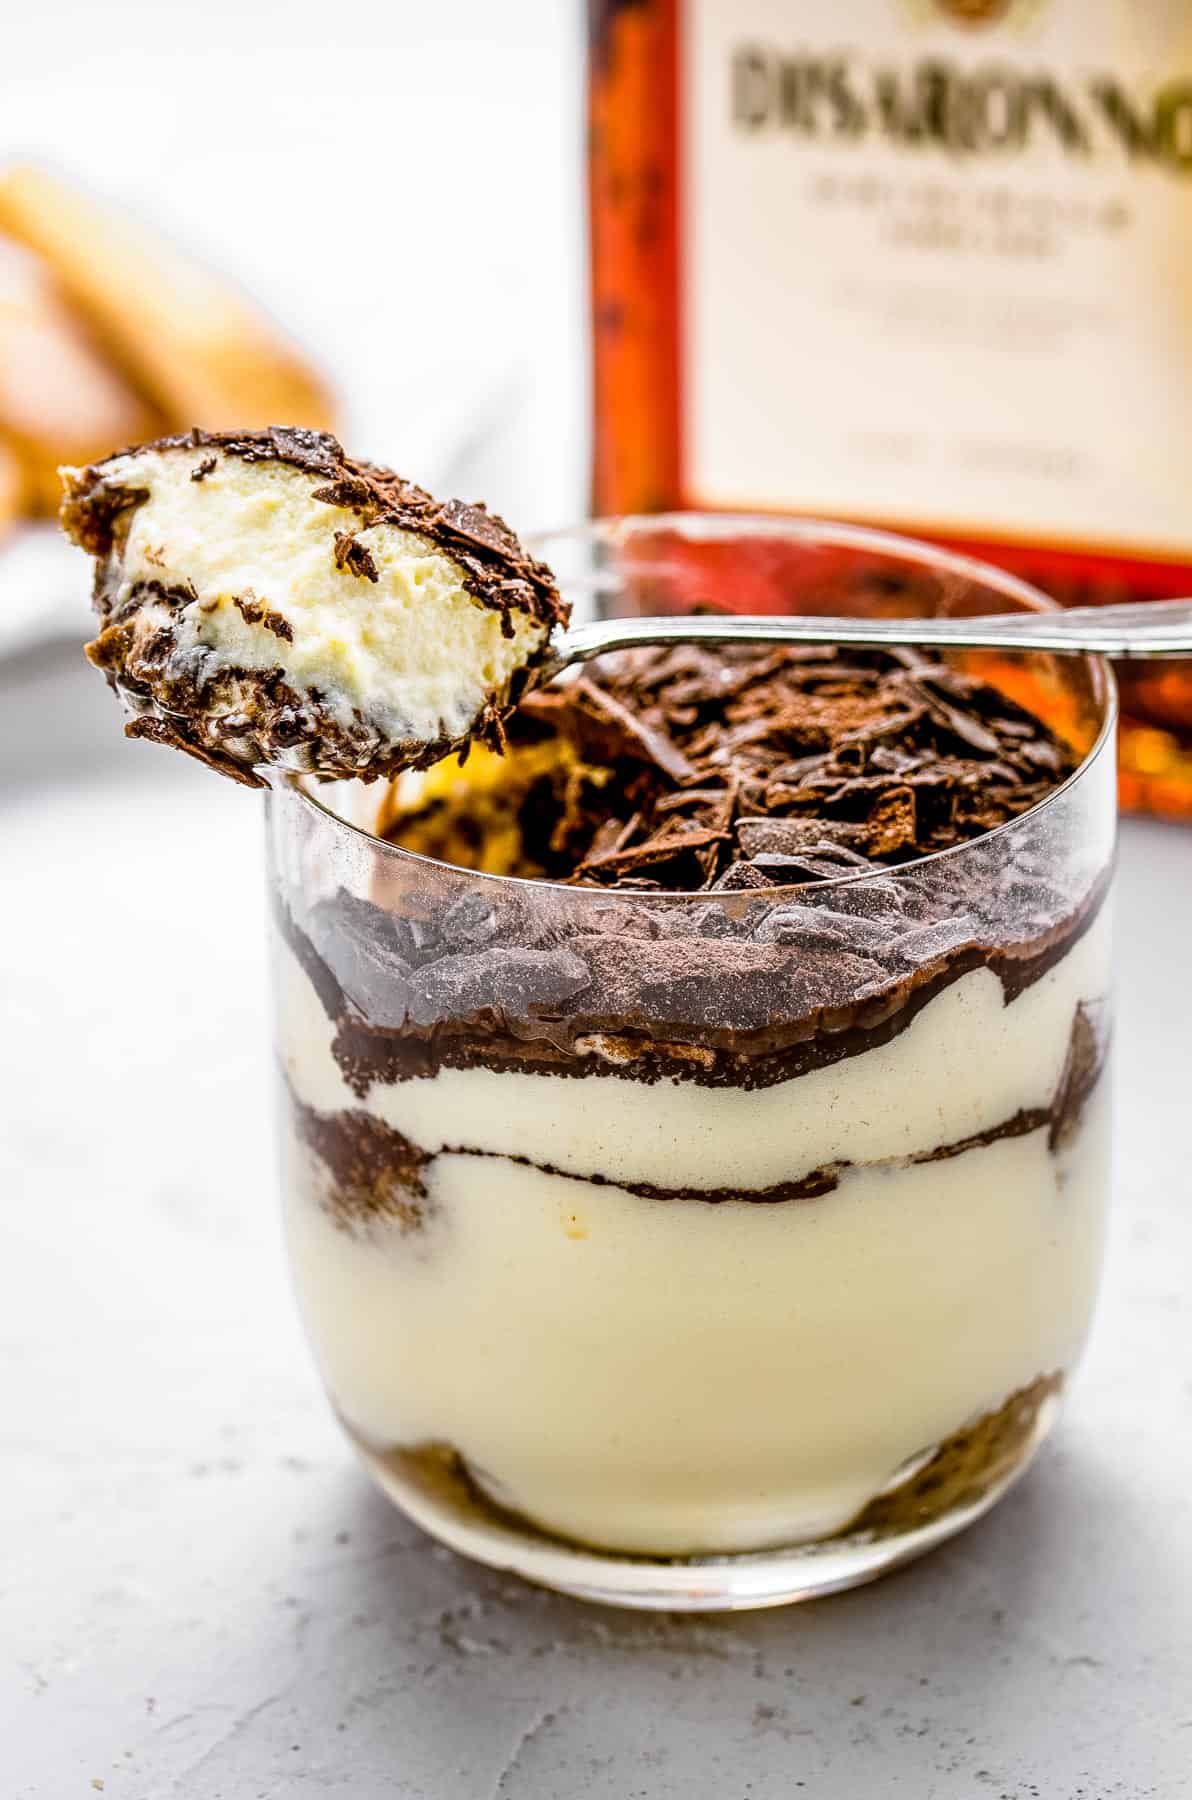 A spoonful of tiramisu is scooped from the glass.